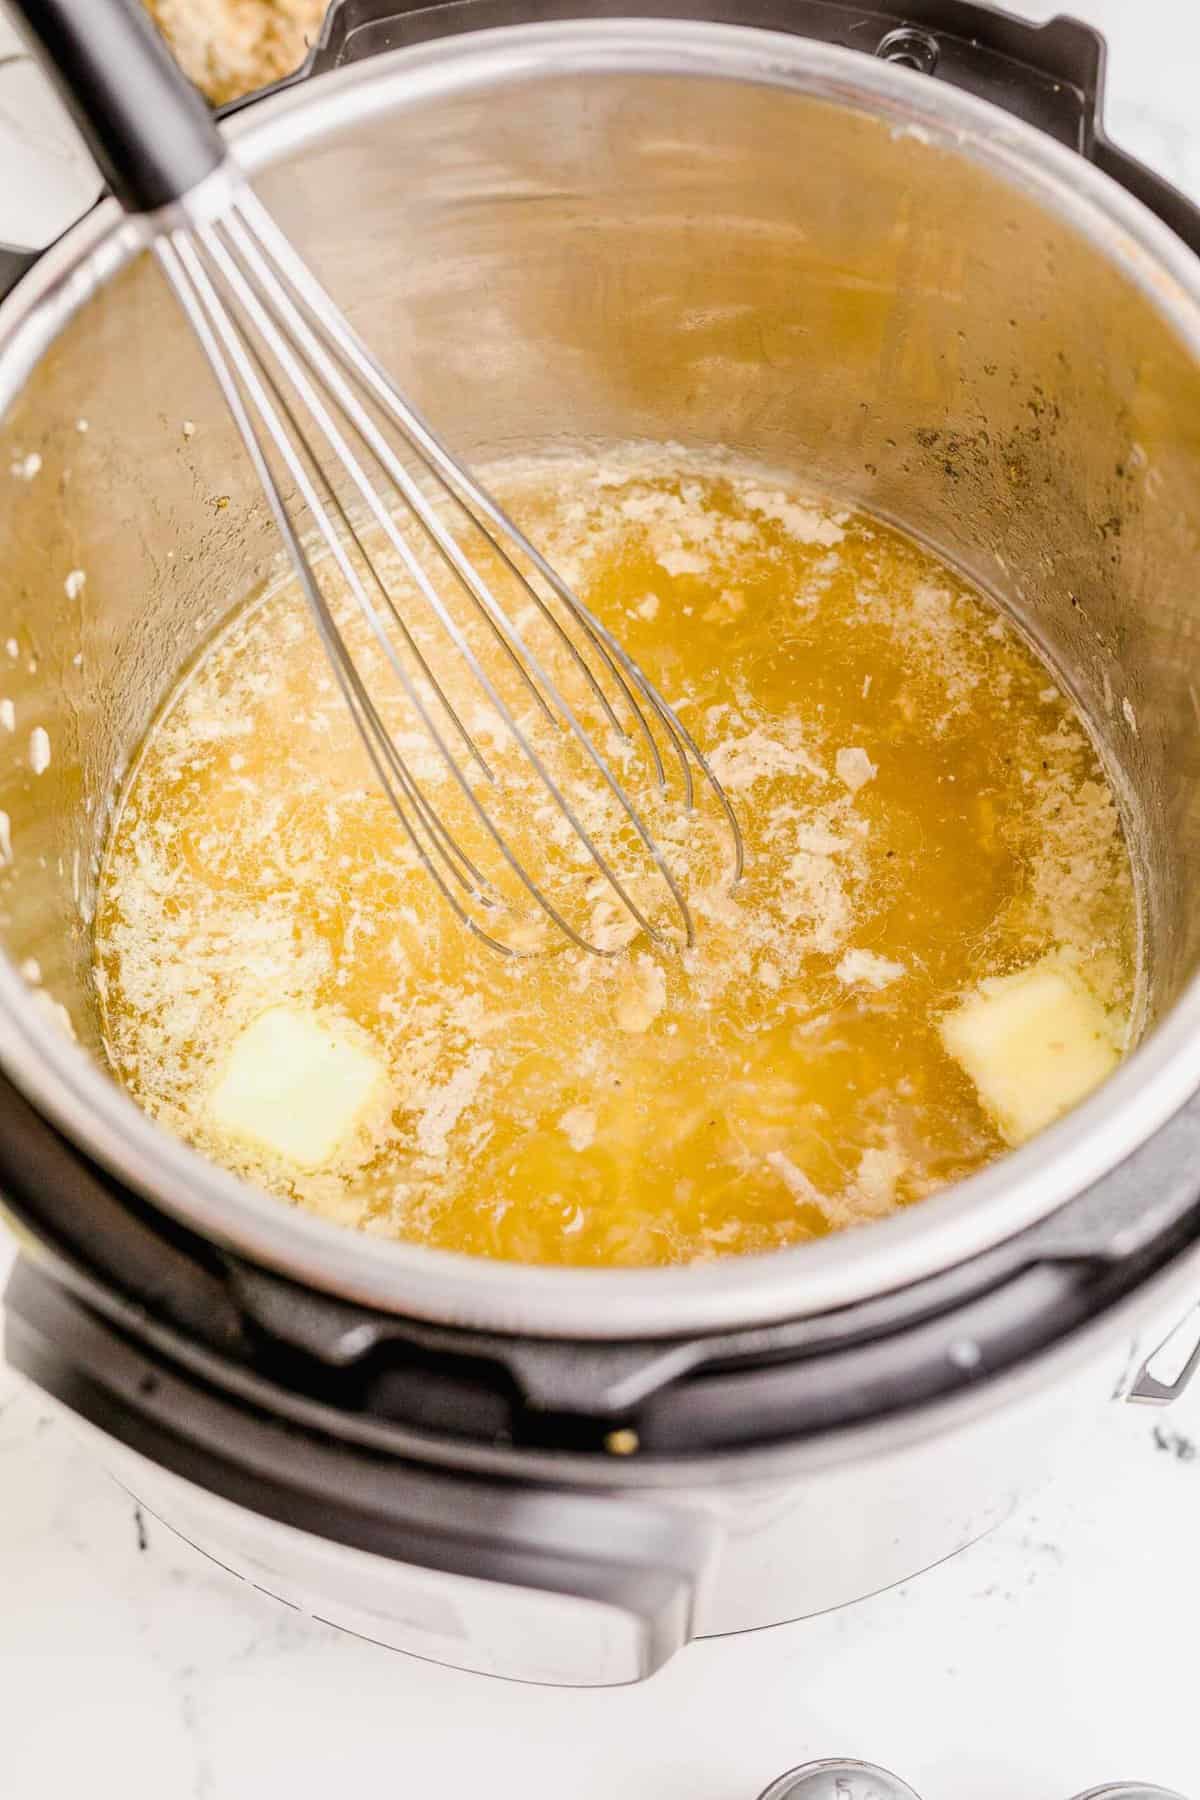 whisking the butter in the insert of the instant pot to melt it